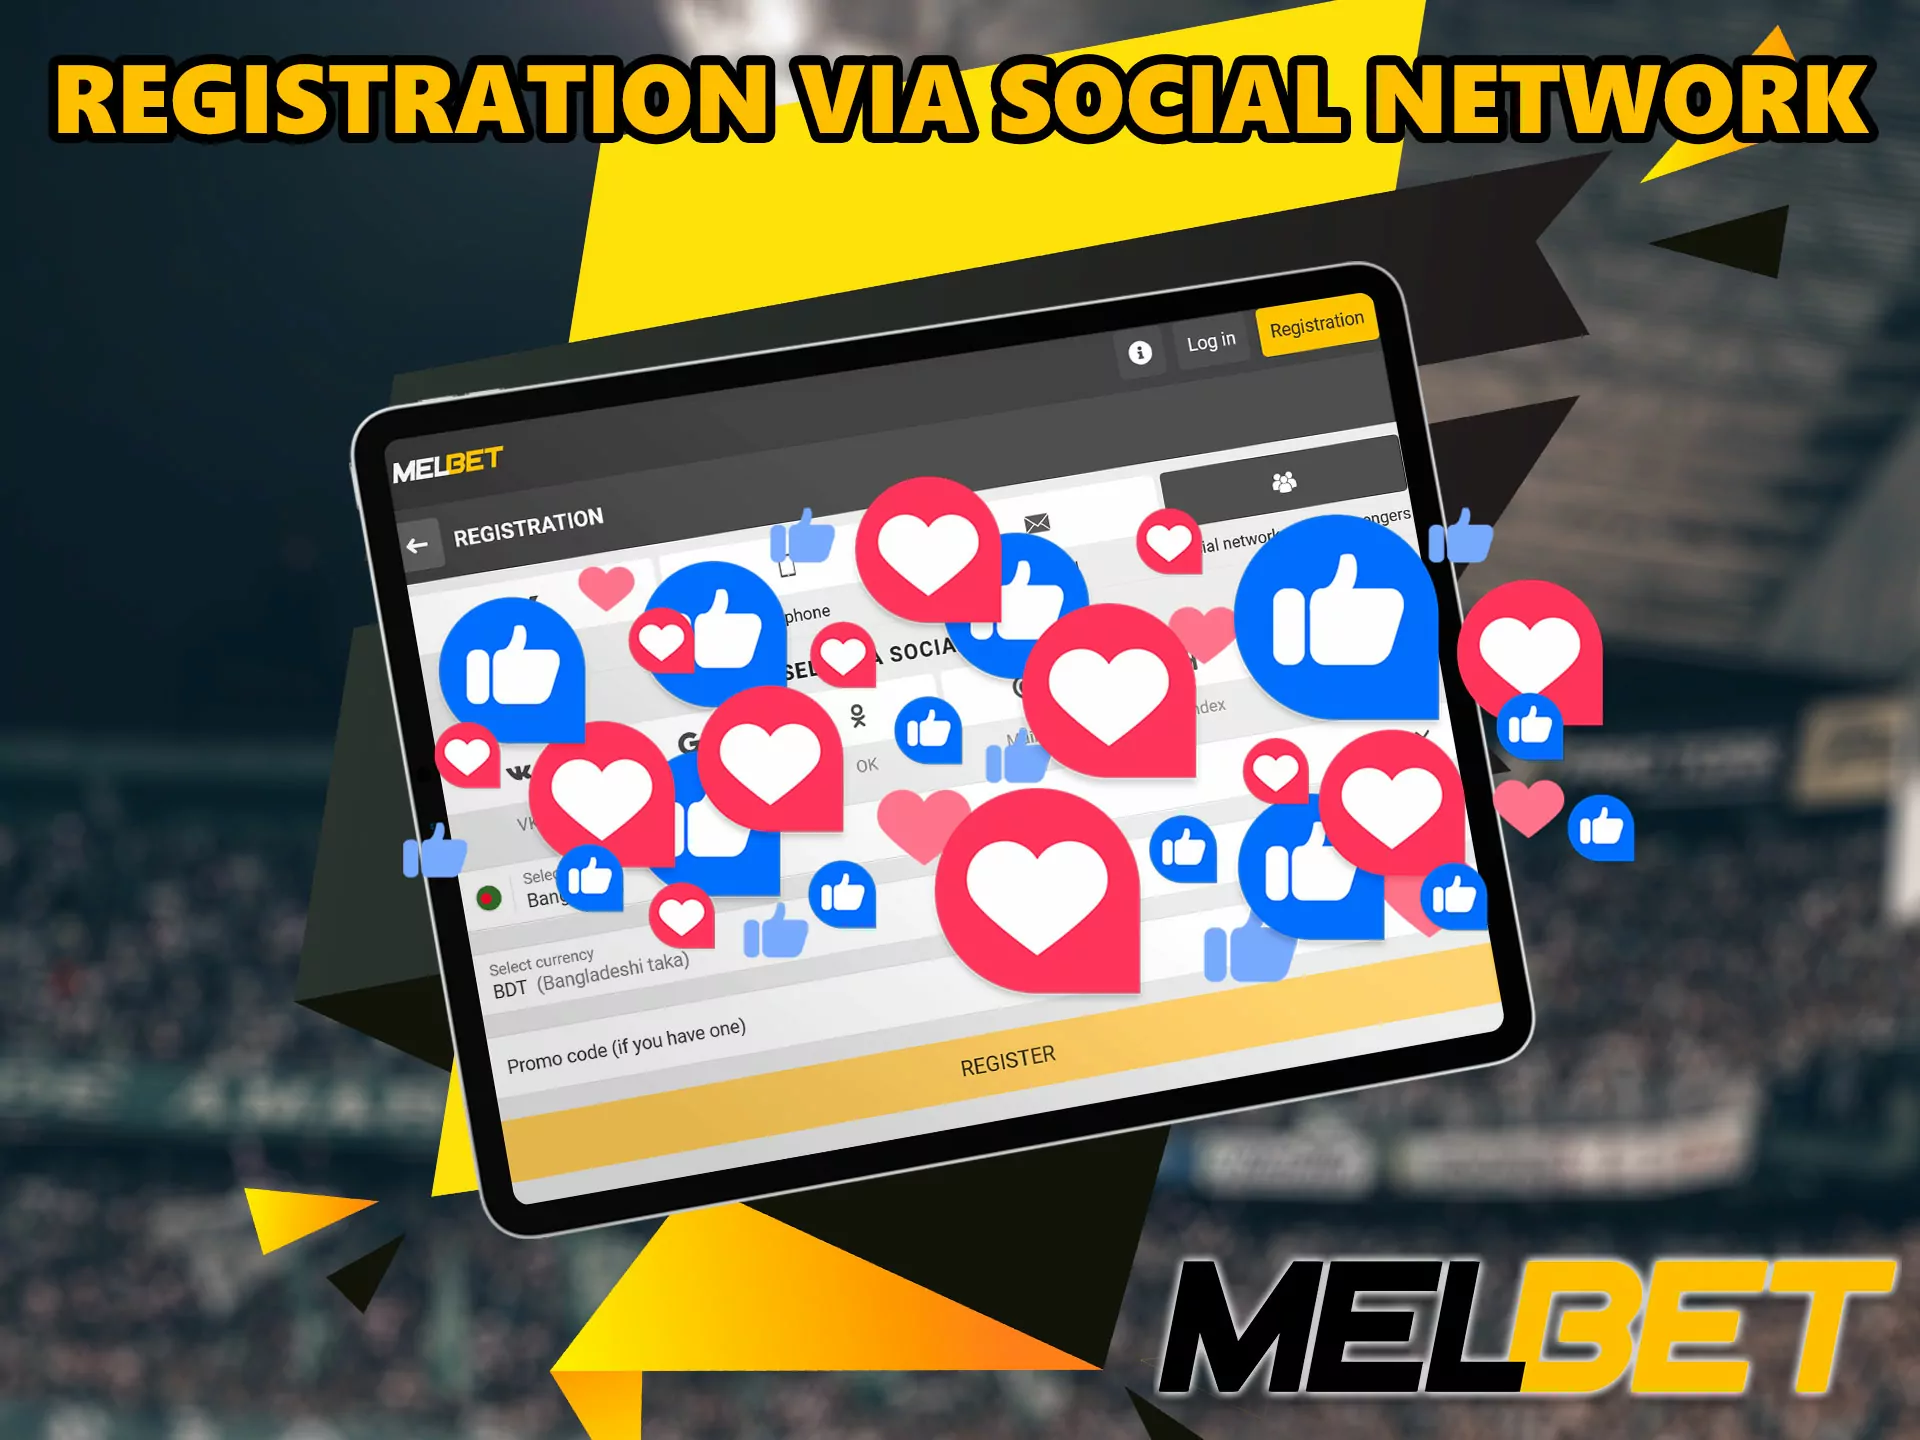 This registration option is similar to "one-click" registration, but the only difference is that the information is pulled from the social network, you do not need to enter it manually.